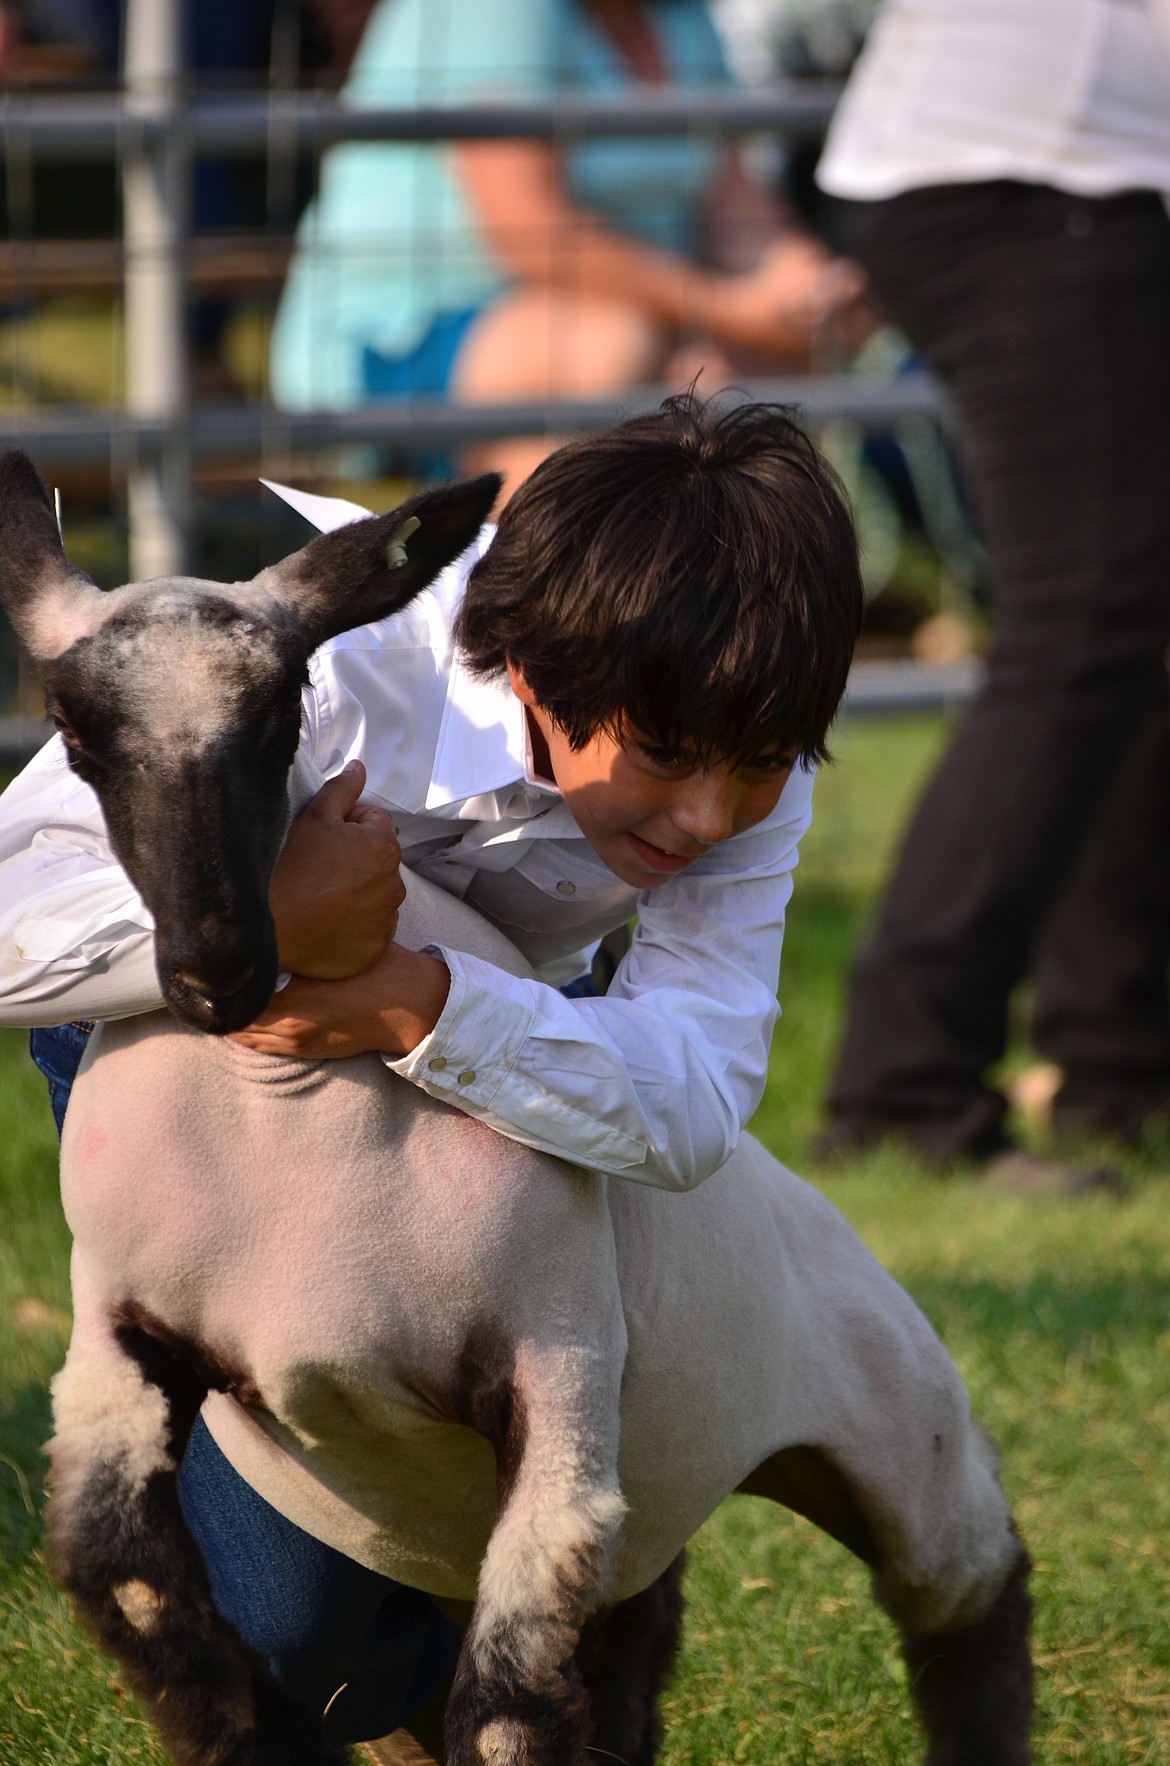 Jacob Hutchins is determined to not let his lamb get the better of him. (Erin Jusseaume/ Clark Fork Valley Press)